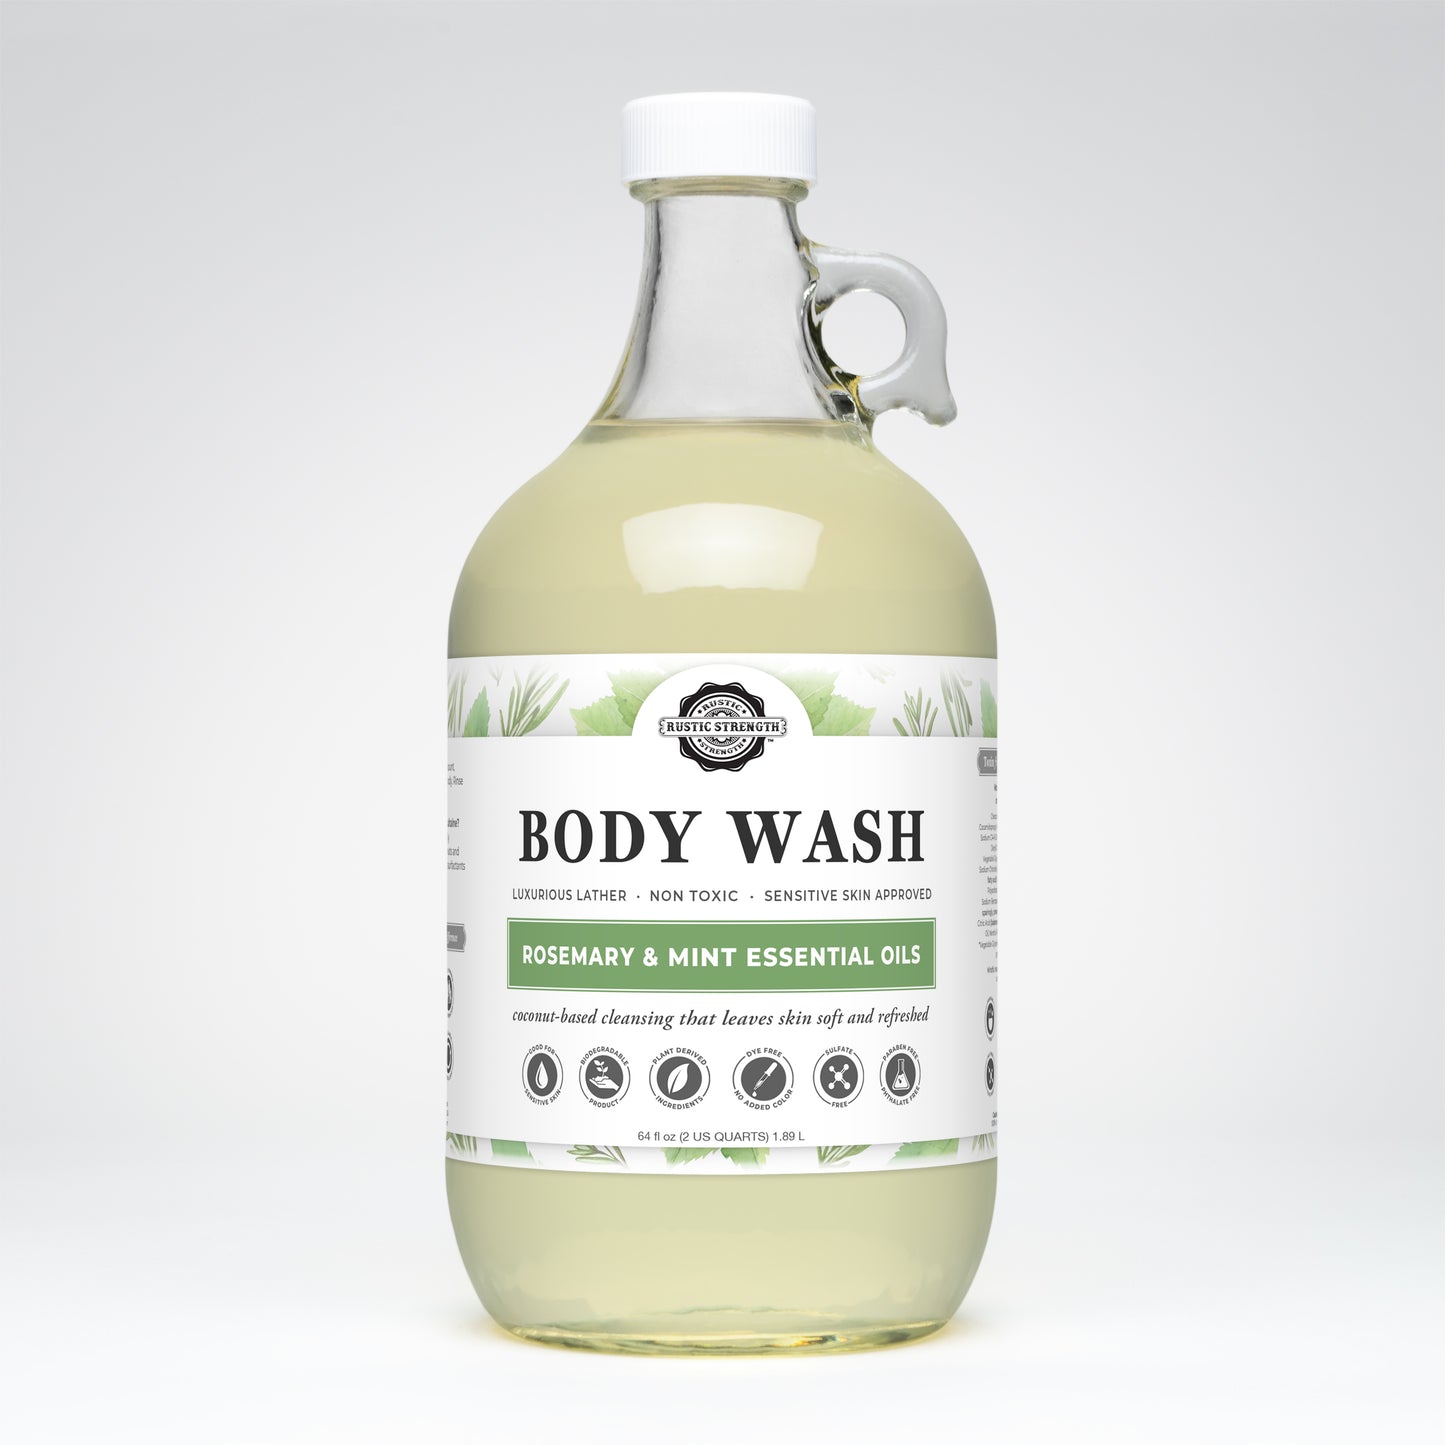 Moisturizing Body Wash | Popular Scents or Unscented